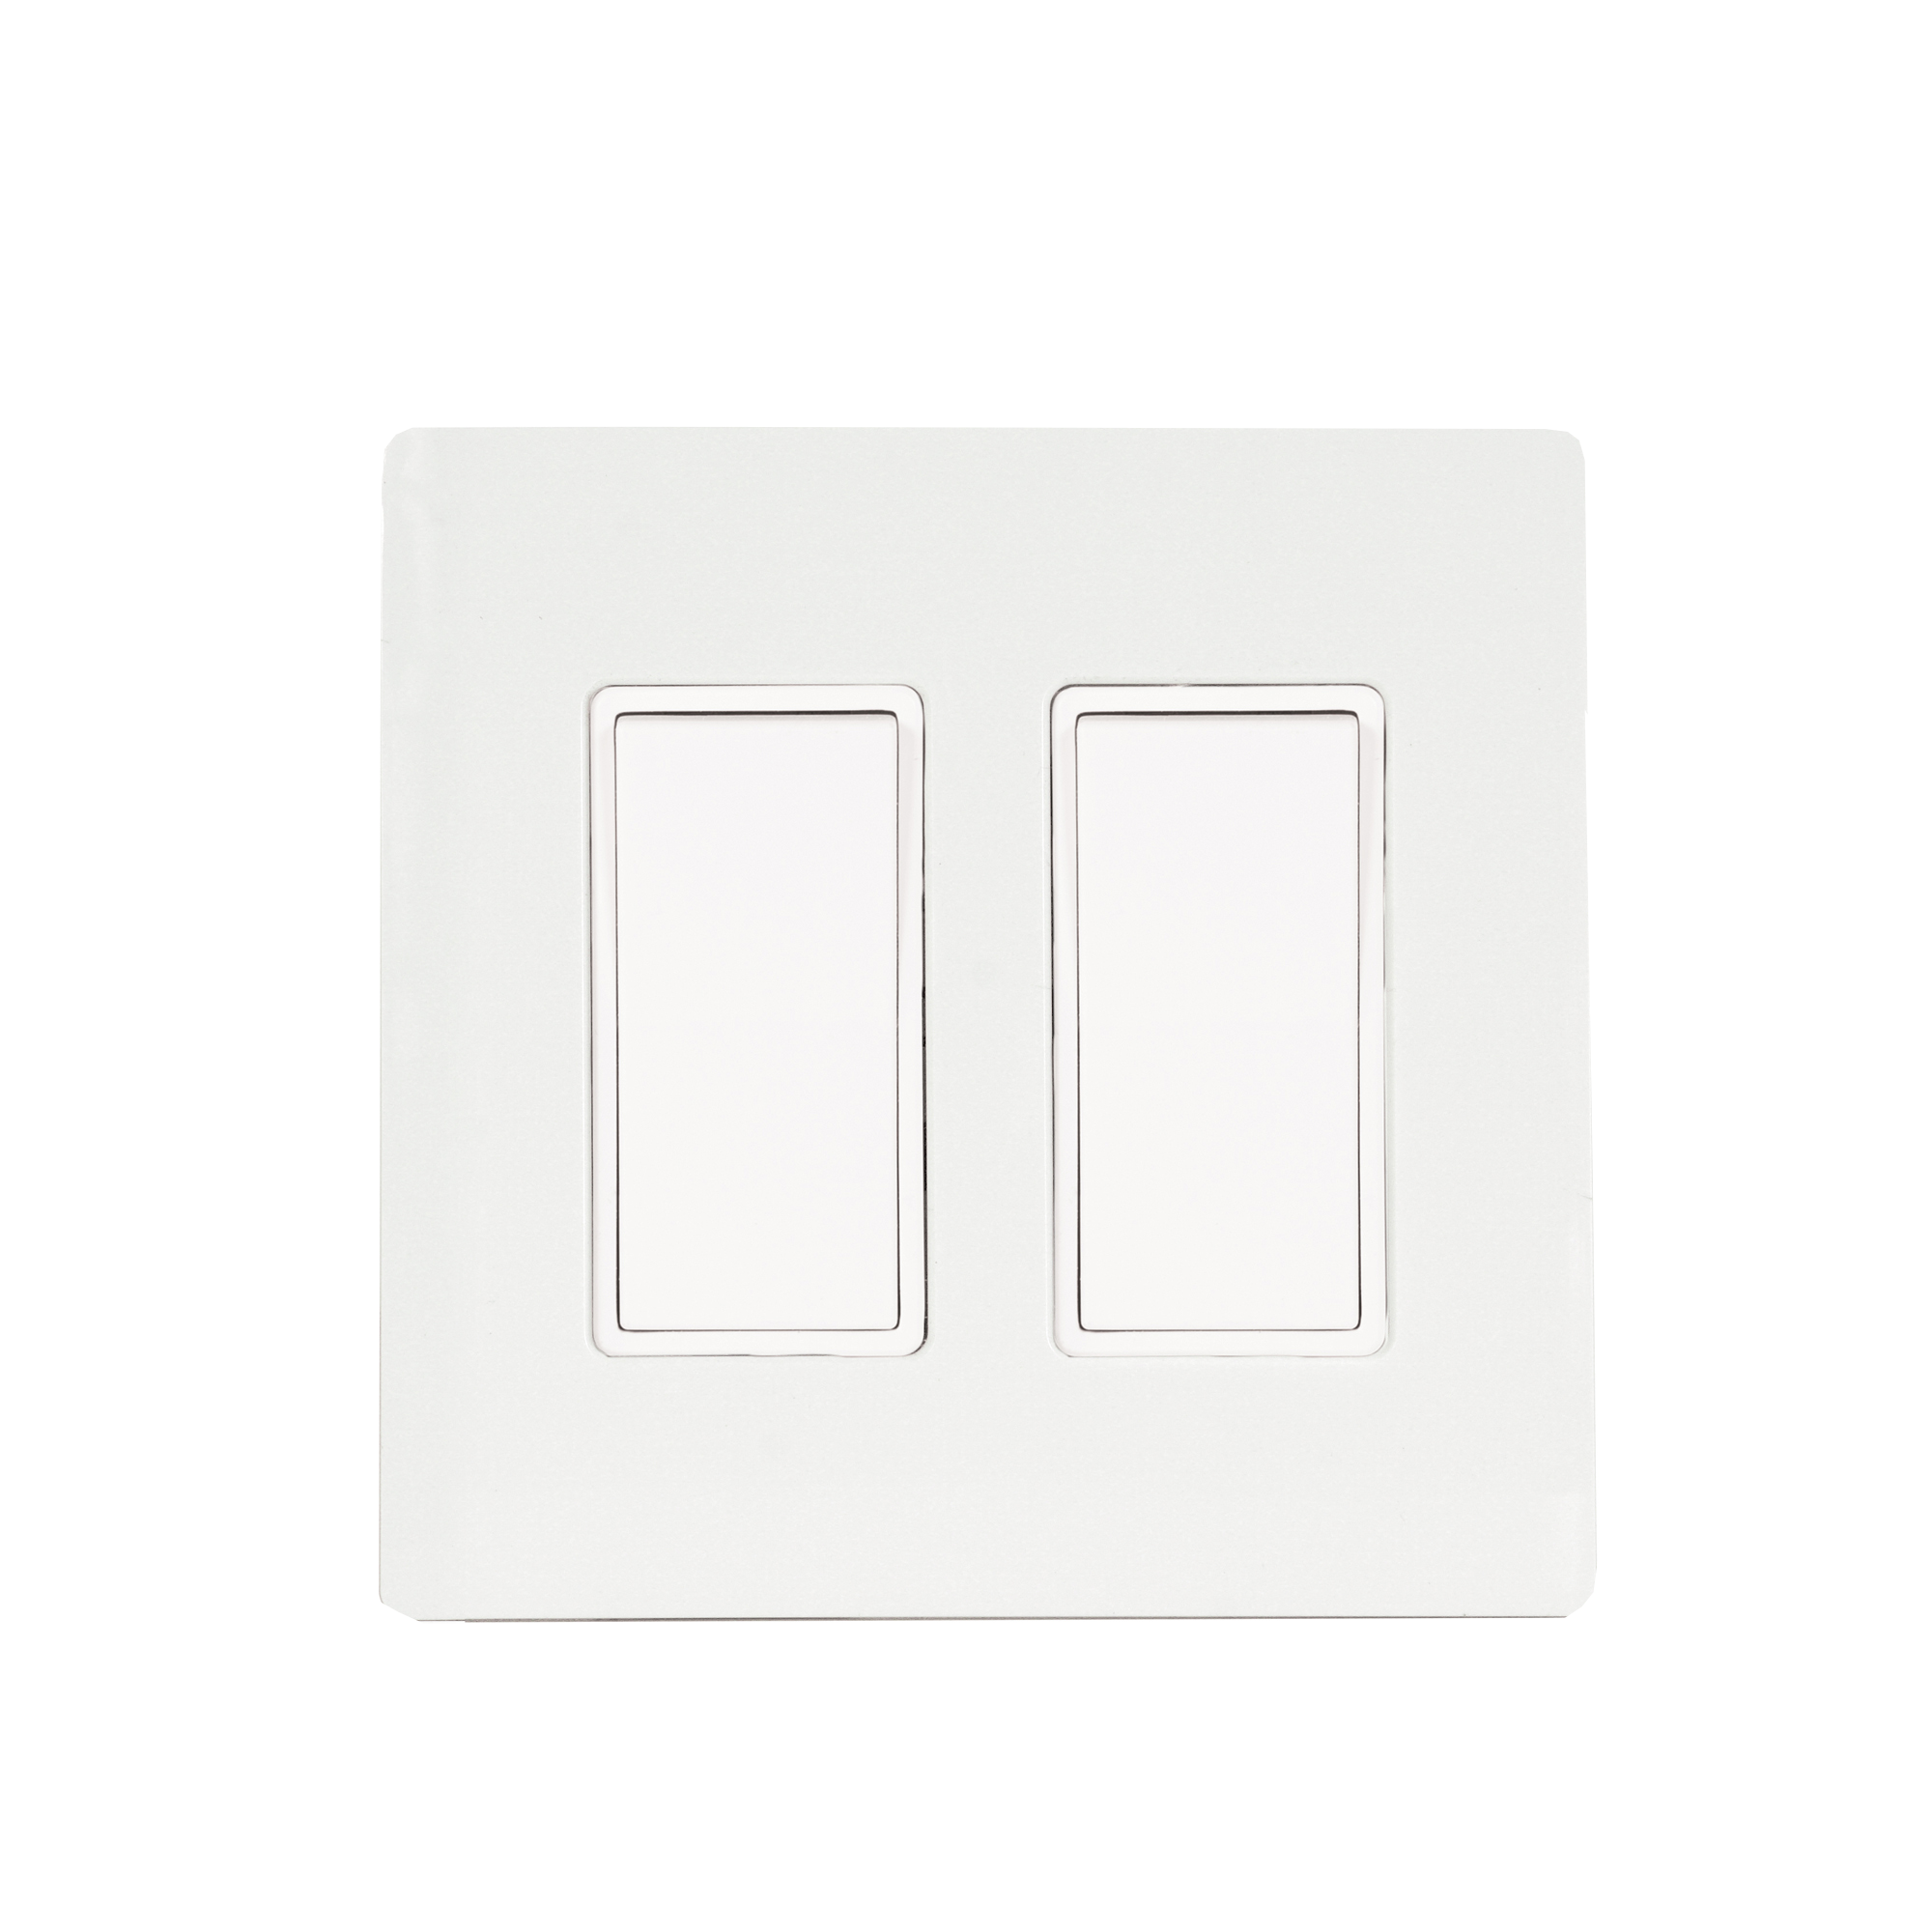 Two Simple On/Off Switch